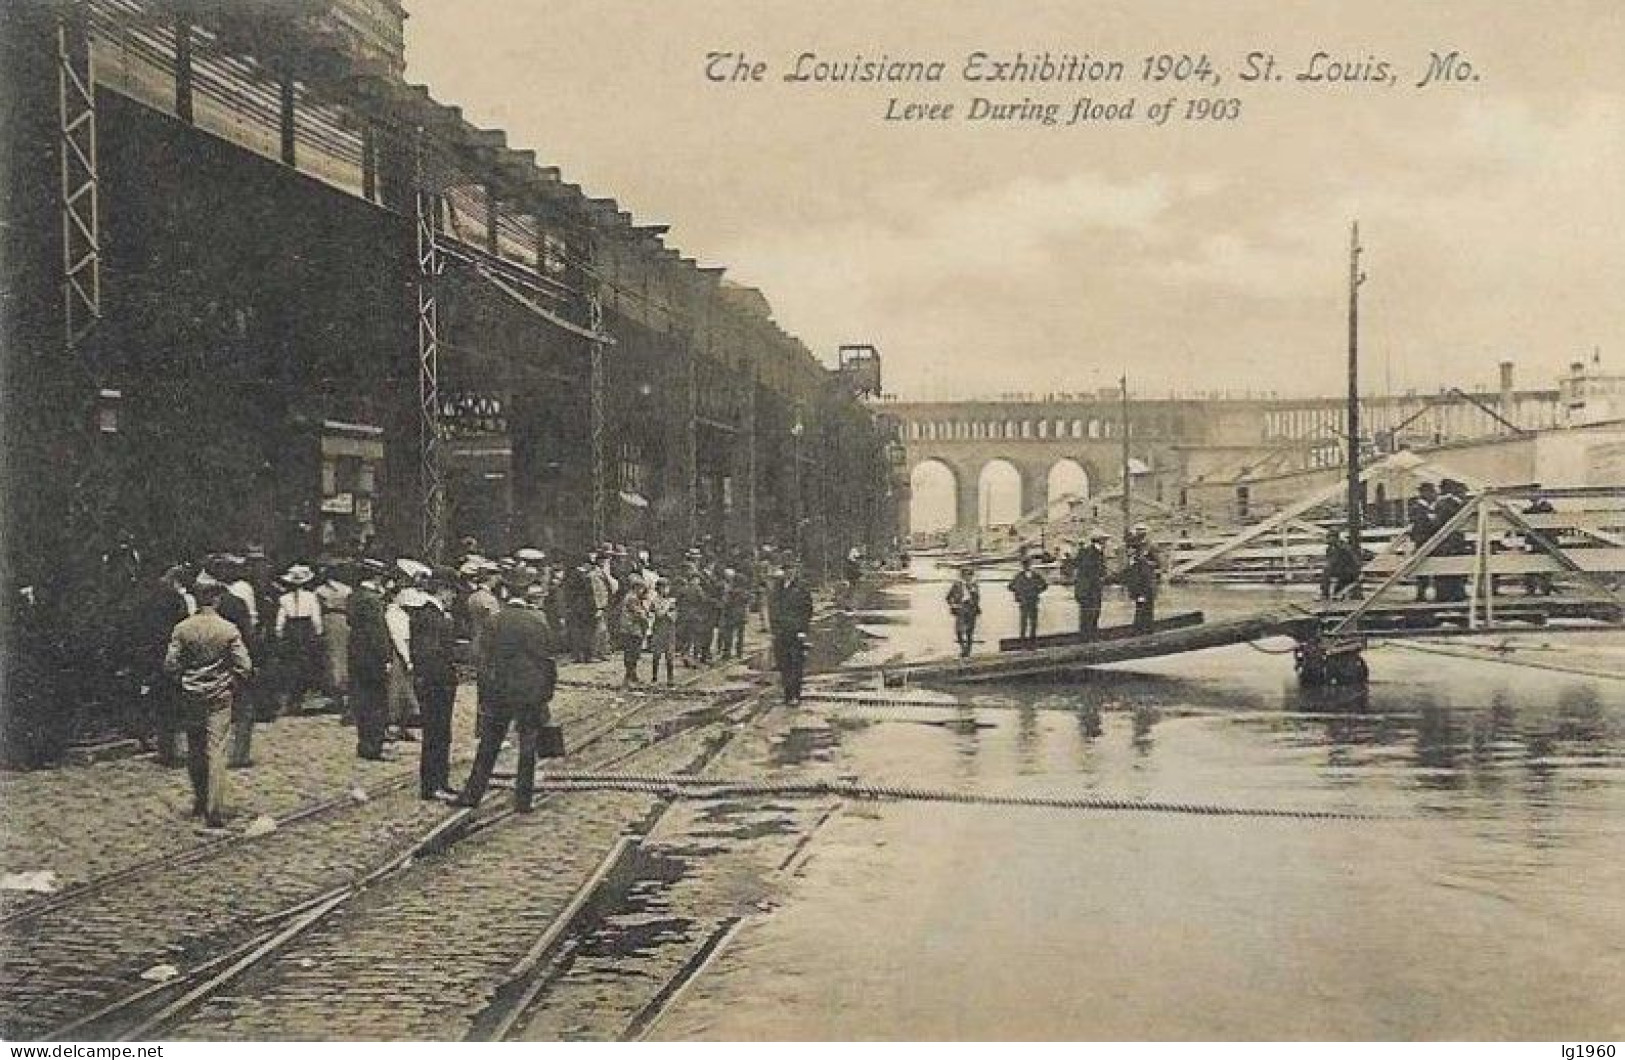 The Louisiana Exhibition 1904 - Saint Louis - Levee During Flood Of 1903 - Card In Very Good Condition! - St Louis – Missouri